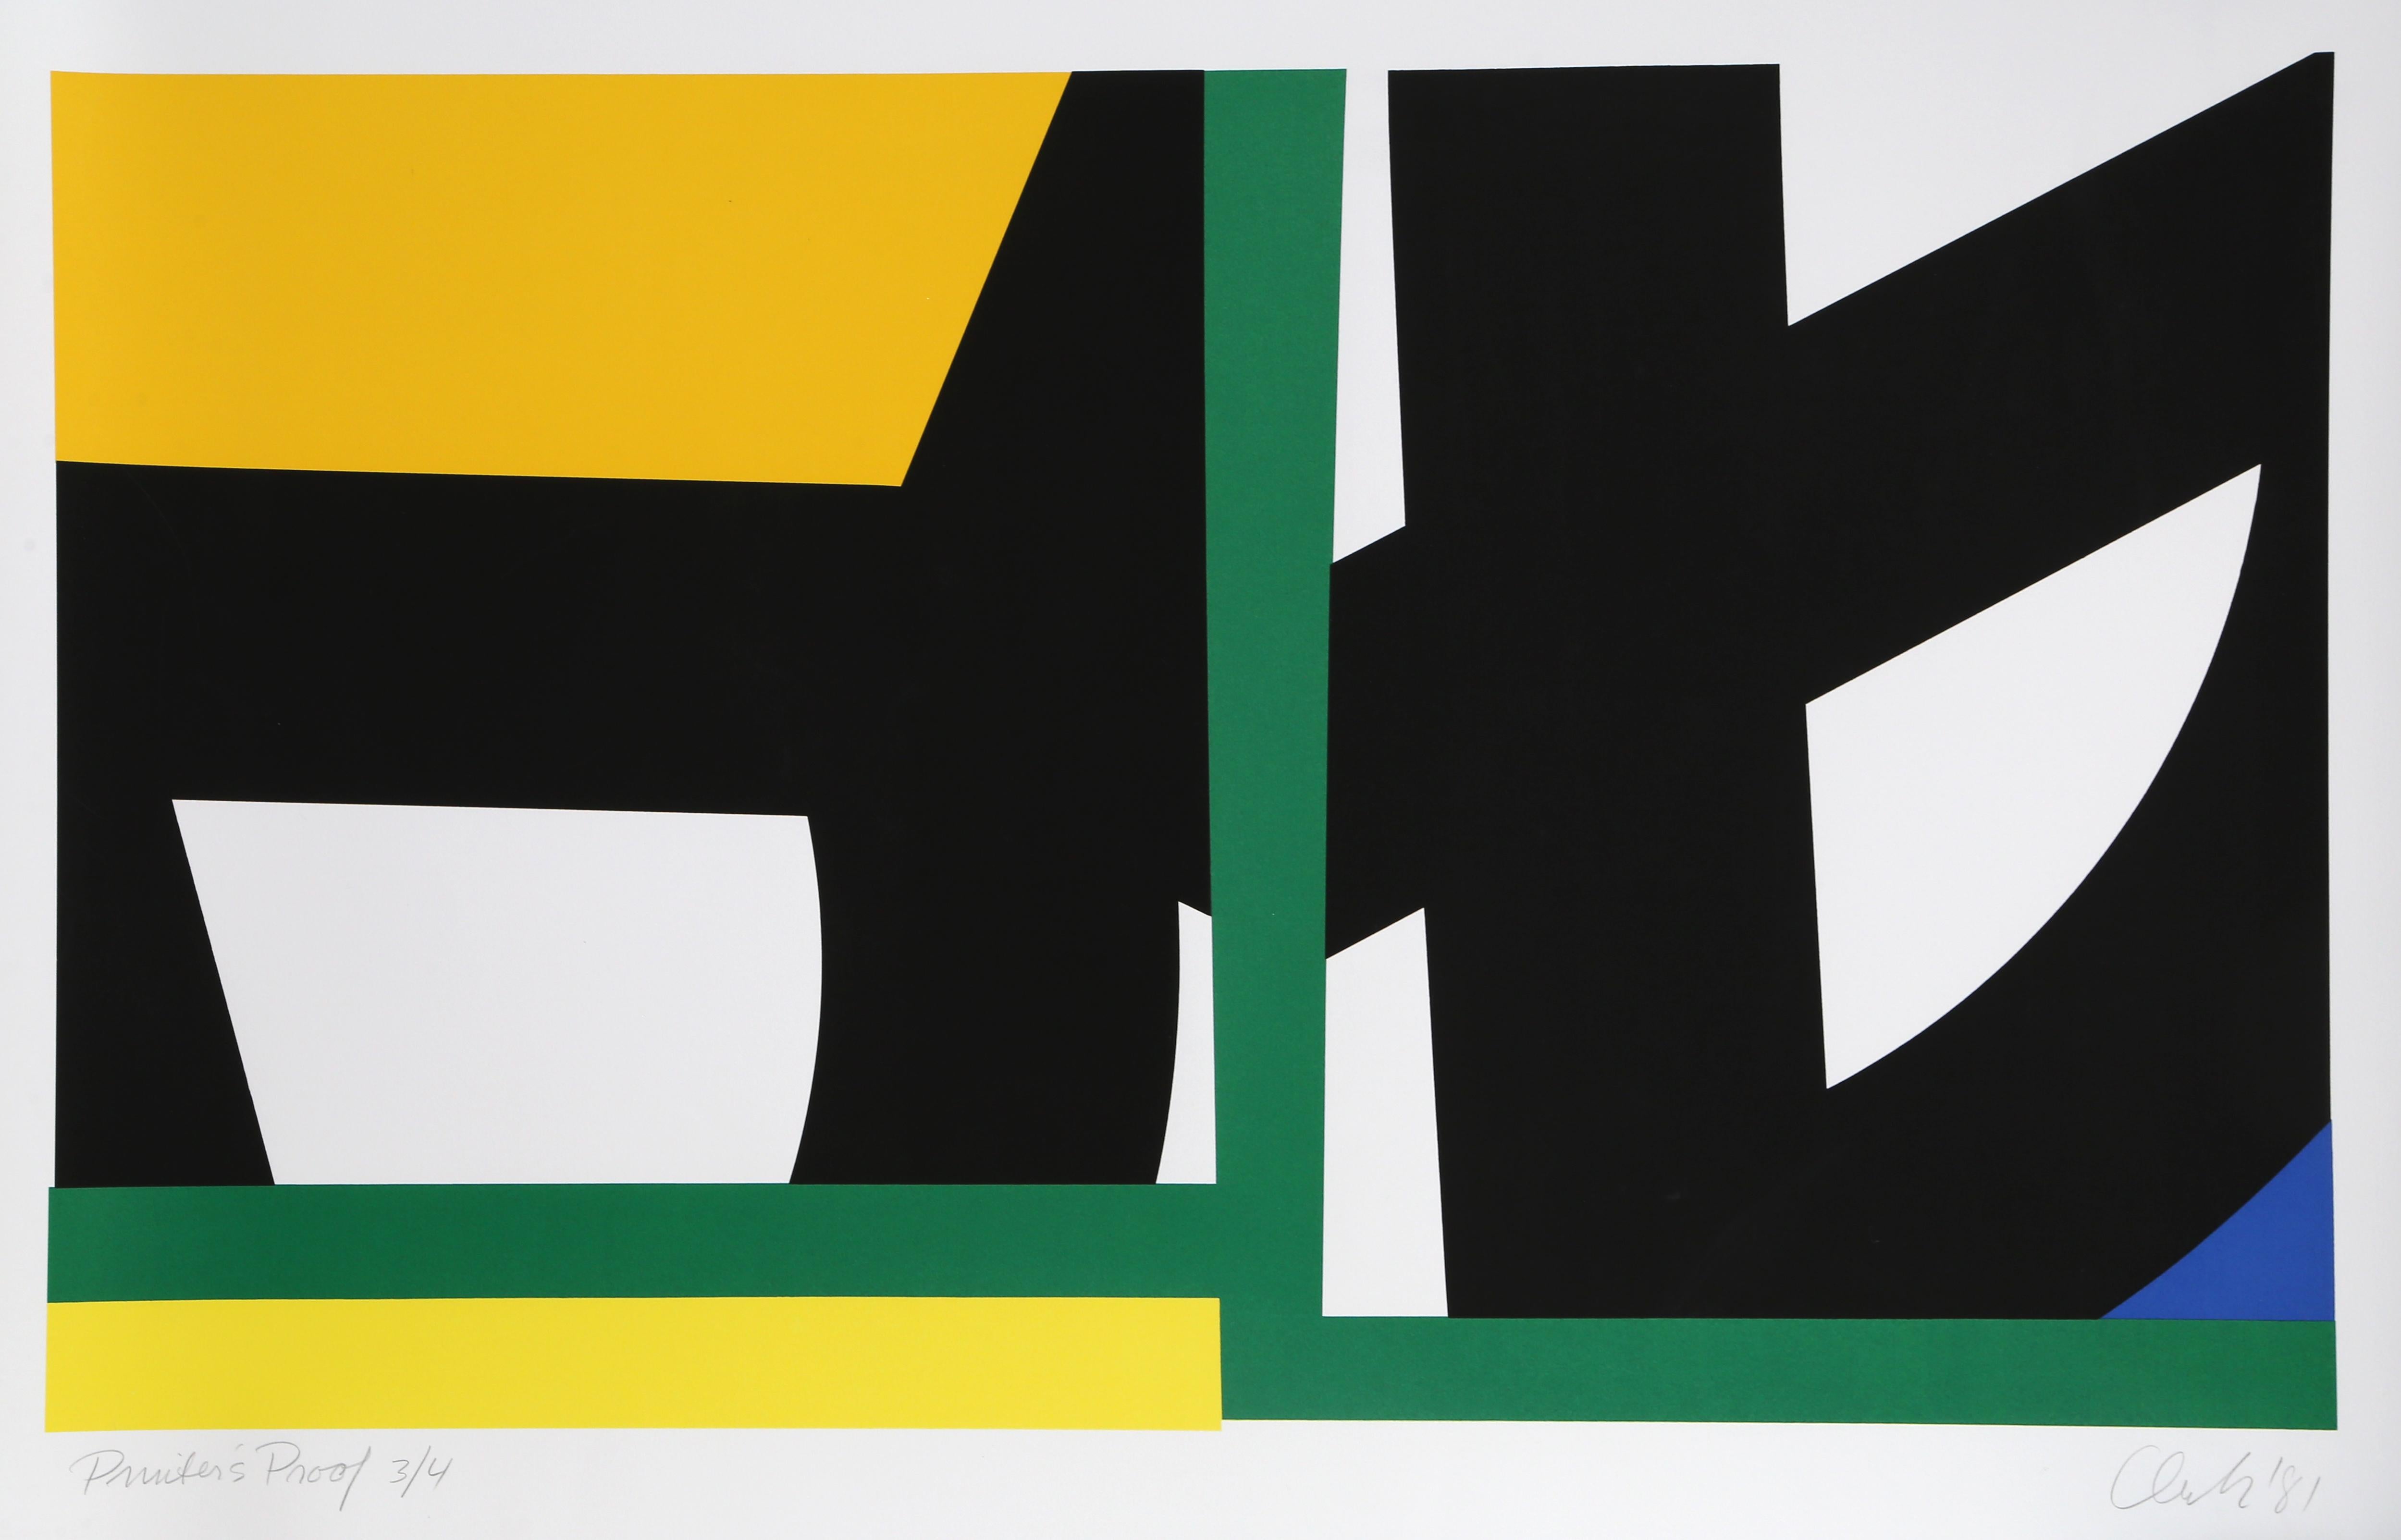 Artist: Pierre Clerk, American (1928 - )
Title: Yellow Green
Year: 1981
Medium: Silkscreen on BFK Rives, signed and numbered in pencil
Edition: PP 3/4
Image Size: 23 x 37 inches
Size: 31 x 44 in. (78.74 x 111.76 cm)